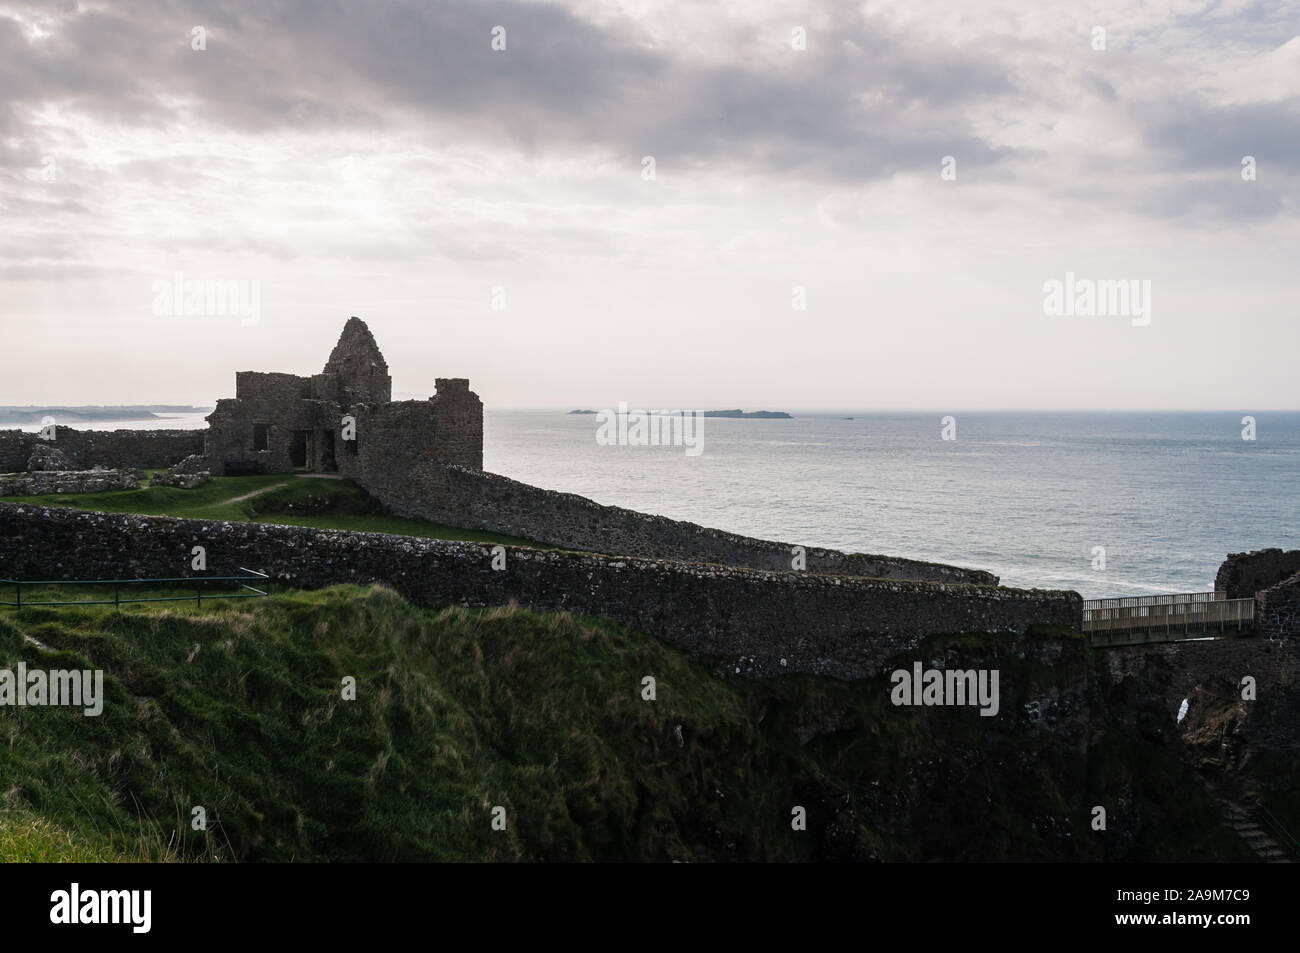 View of the remains of Dunluce castle on the Irish coast of Northern Ireland, County Antrim. Stock Photo